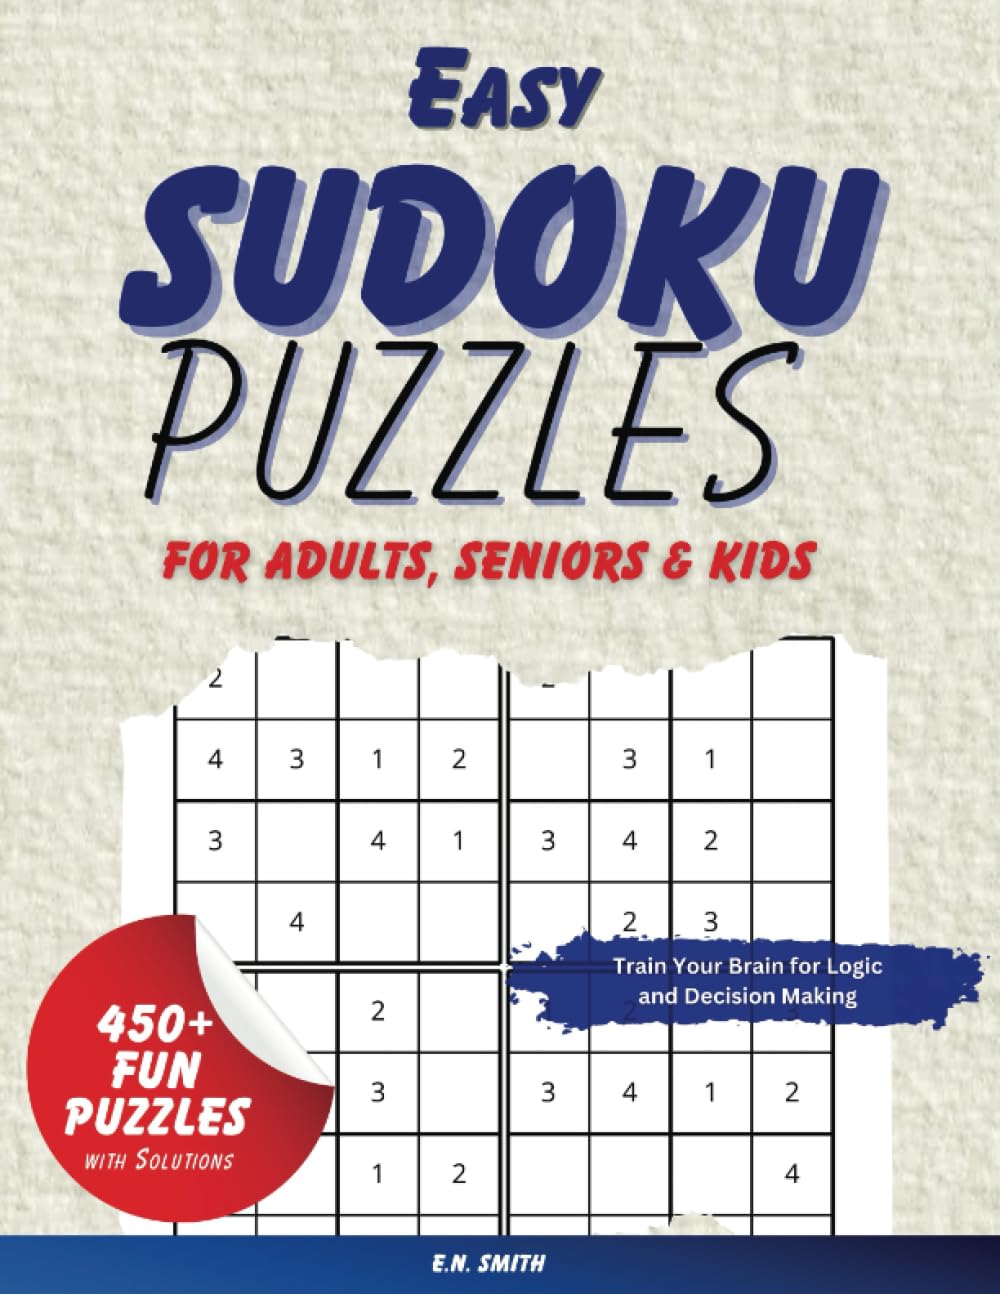 Easy Sudoku Puzzles for Adults, Kids, Seniors: 450+ Fun Puzzles to Train Your Brain for Logic & Decision Making - with Solutions